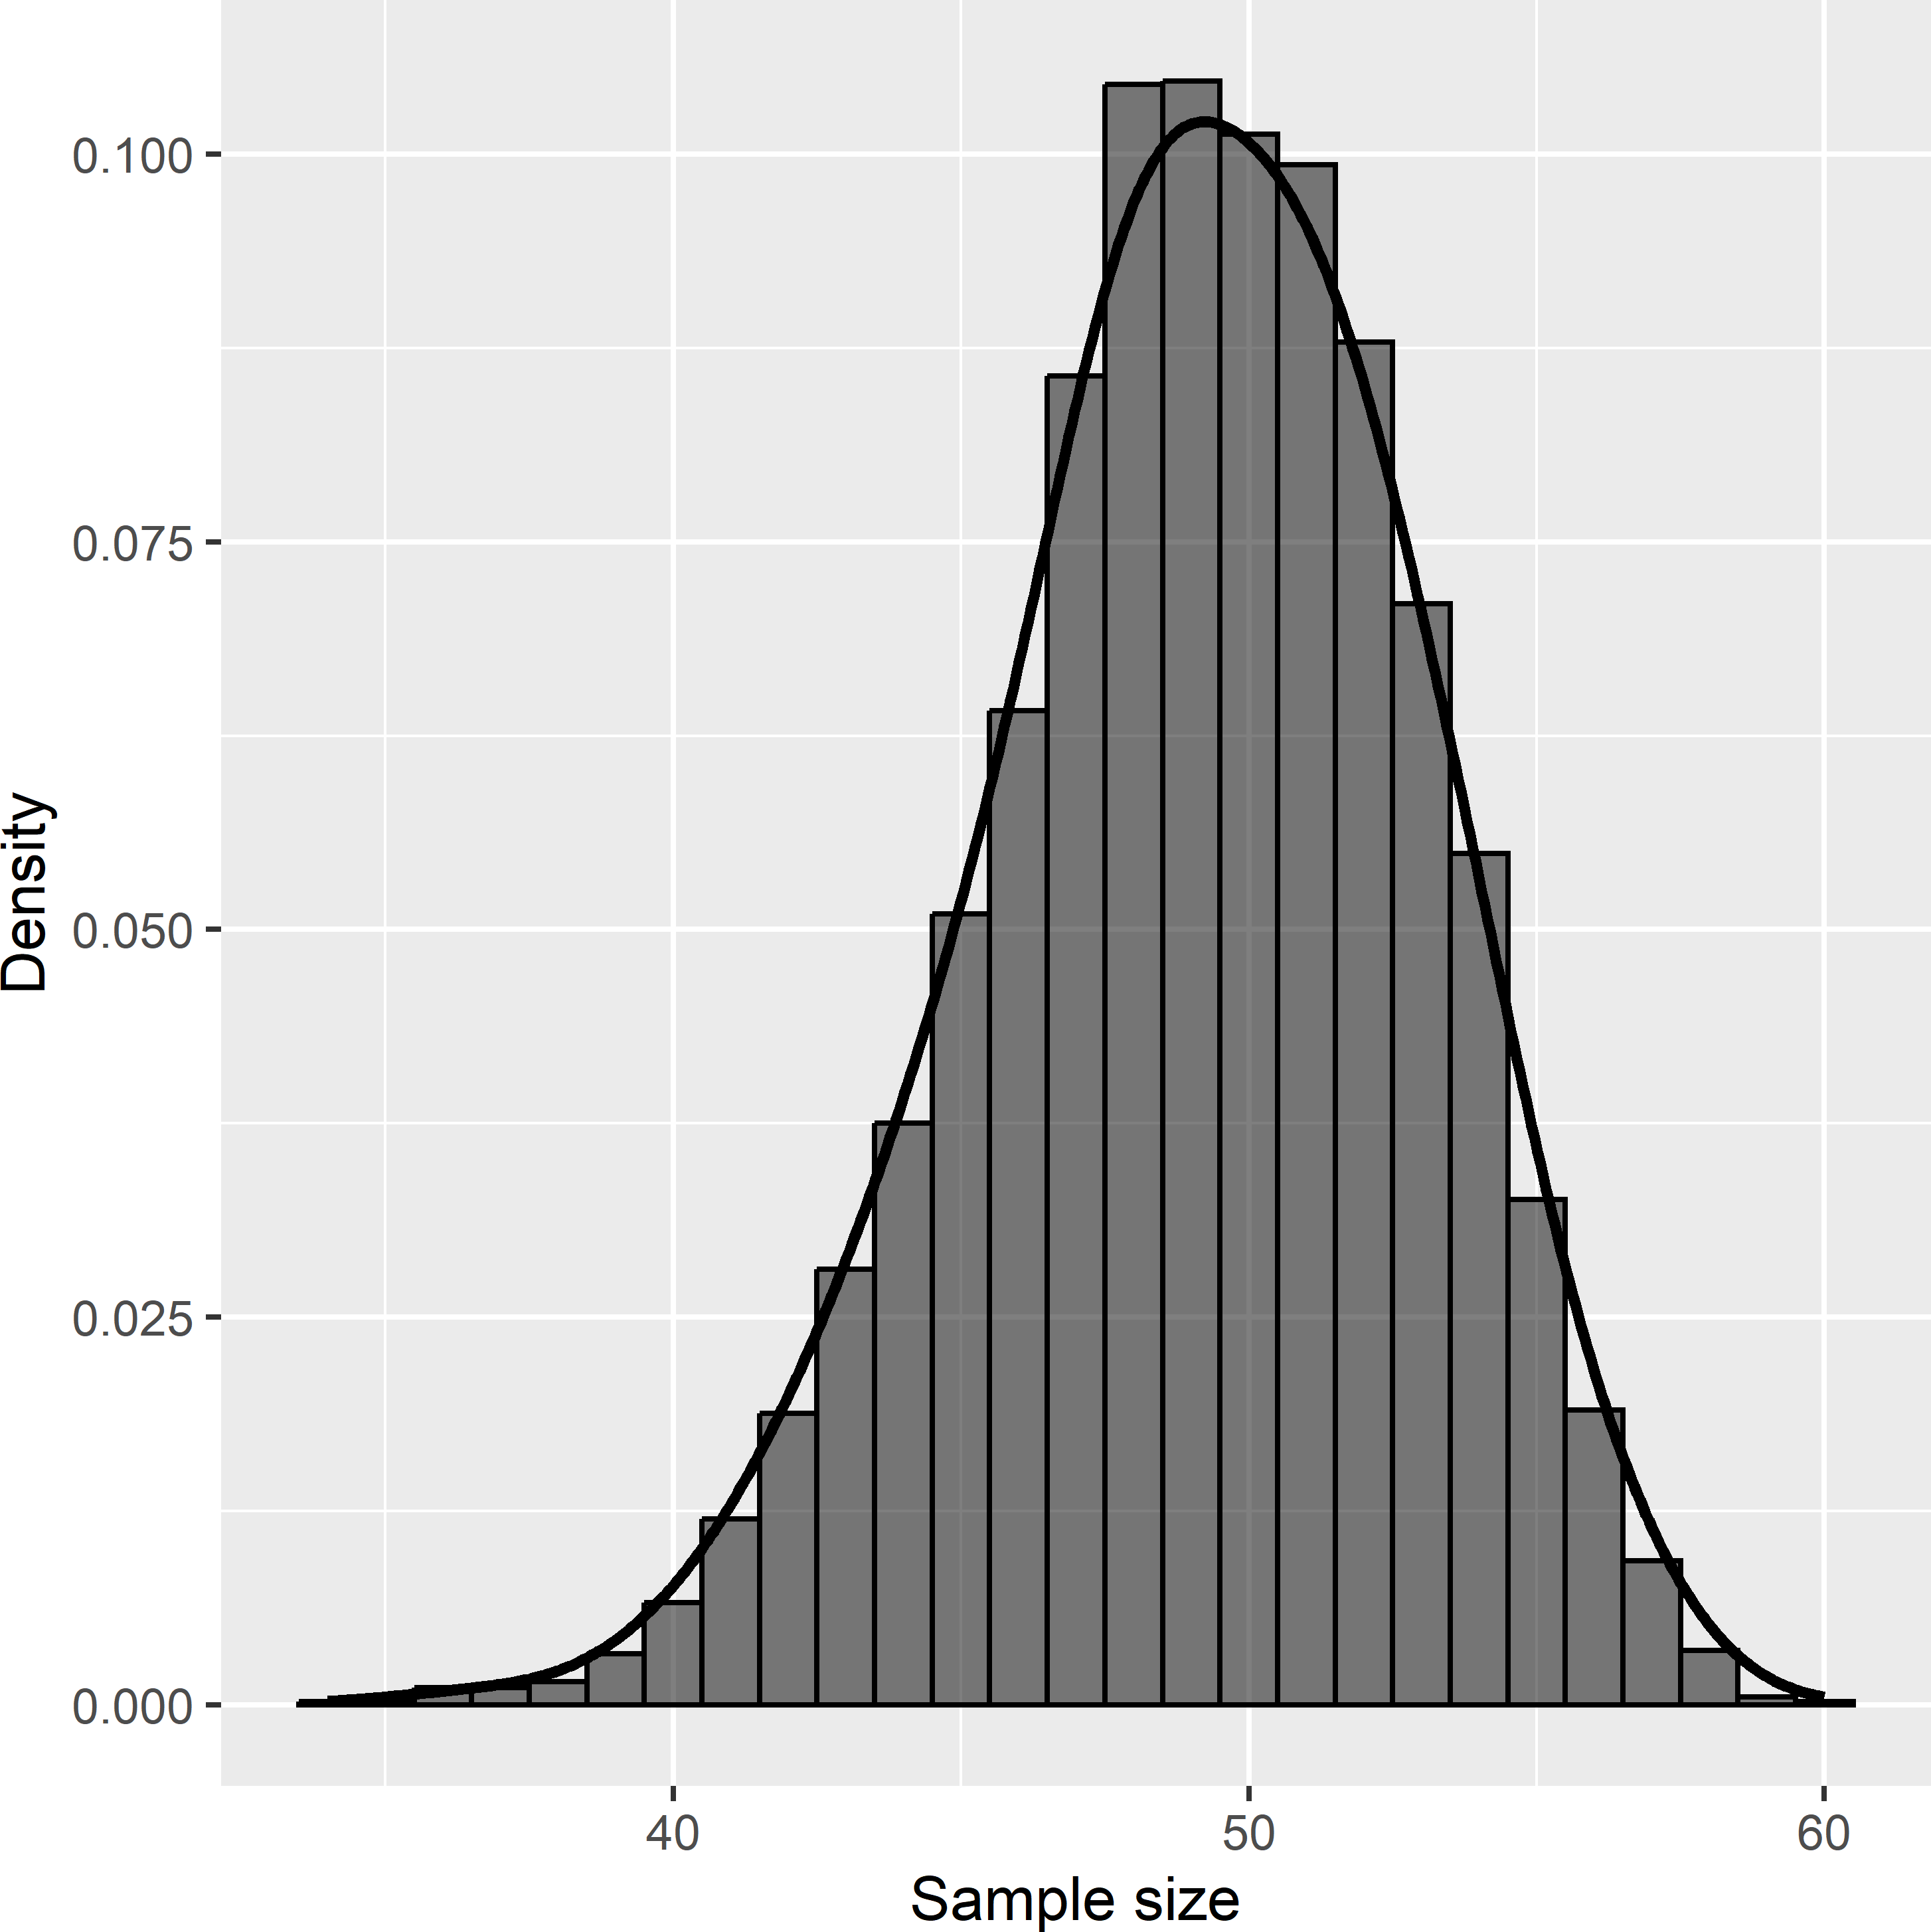 Approximated sampling distribution of the sample size with cluster random sampling from Voorst, for six clusters selected by ppswr.